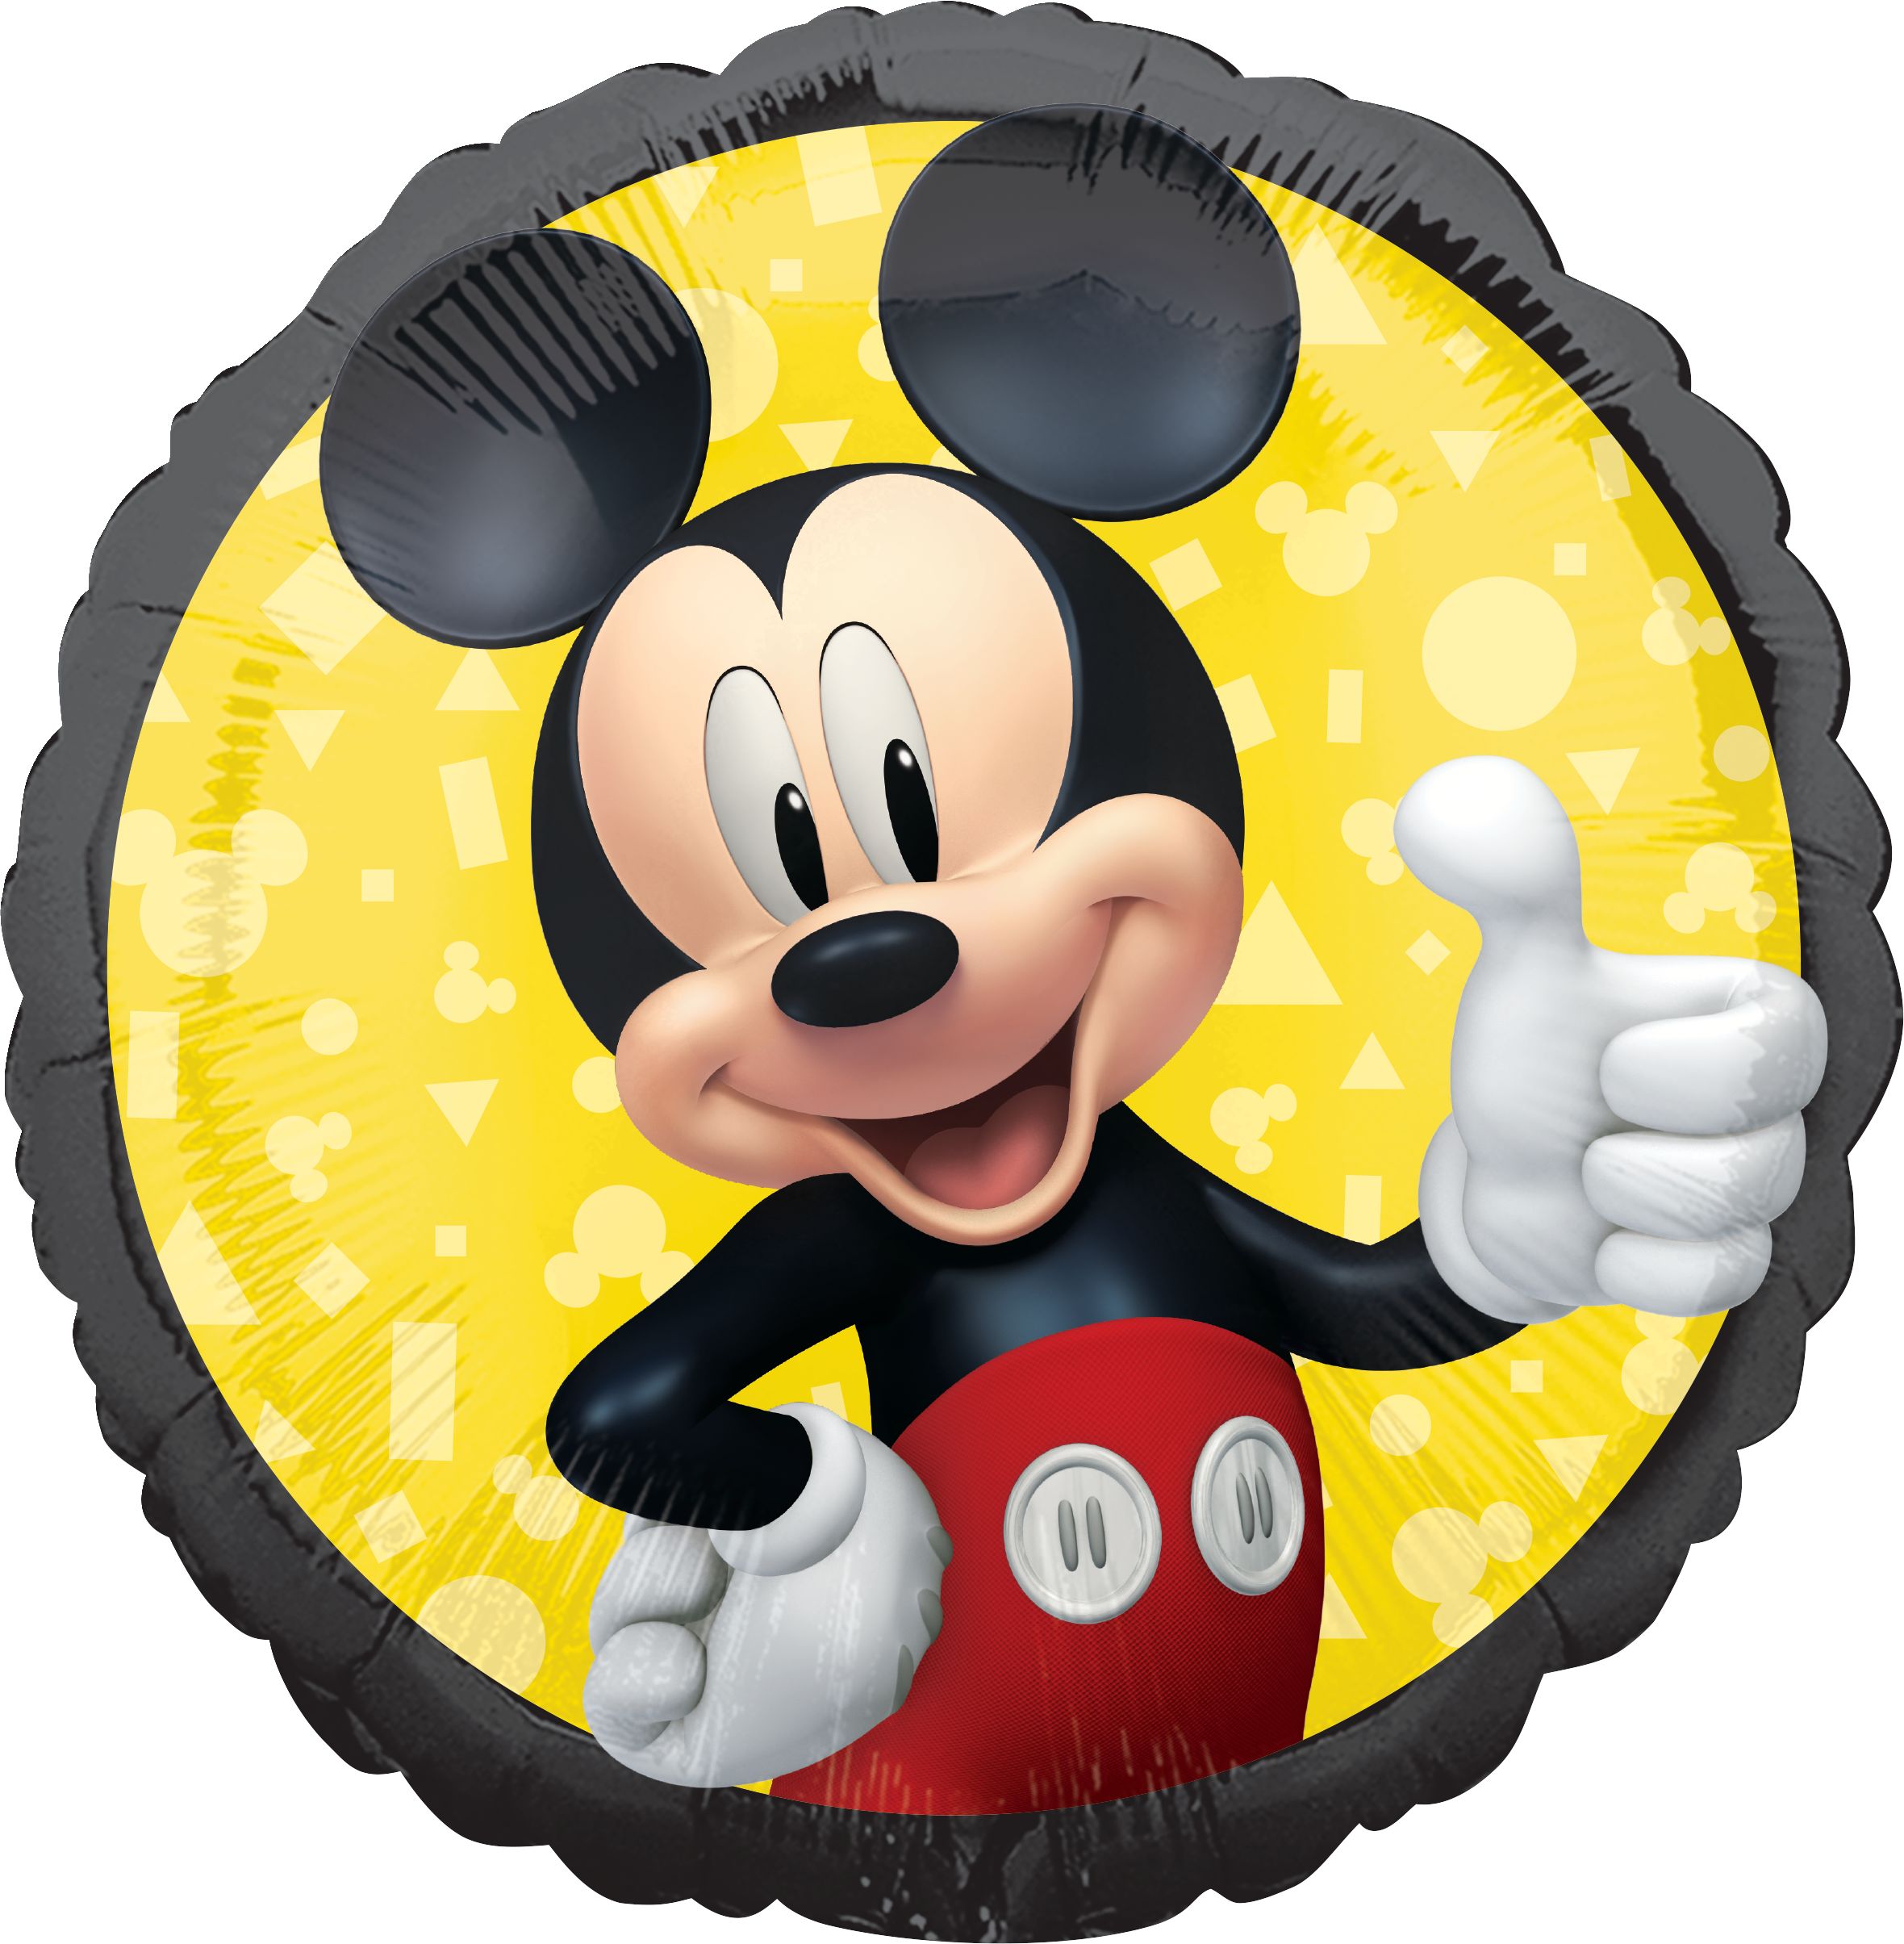 See the TODAY ONLY Mickey Balloons to Celebrate the New Year in